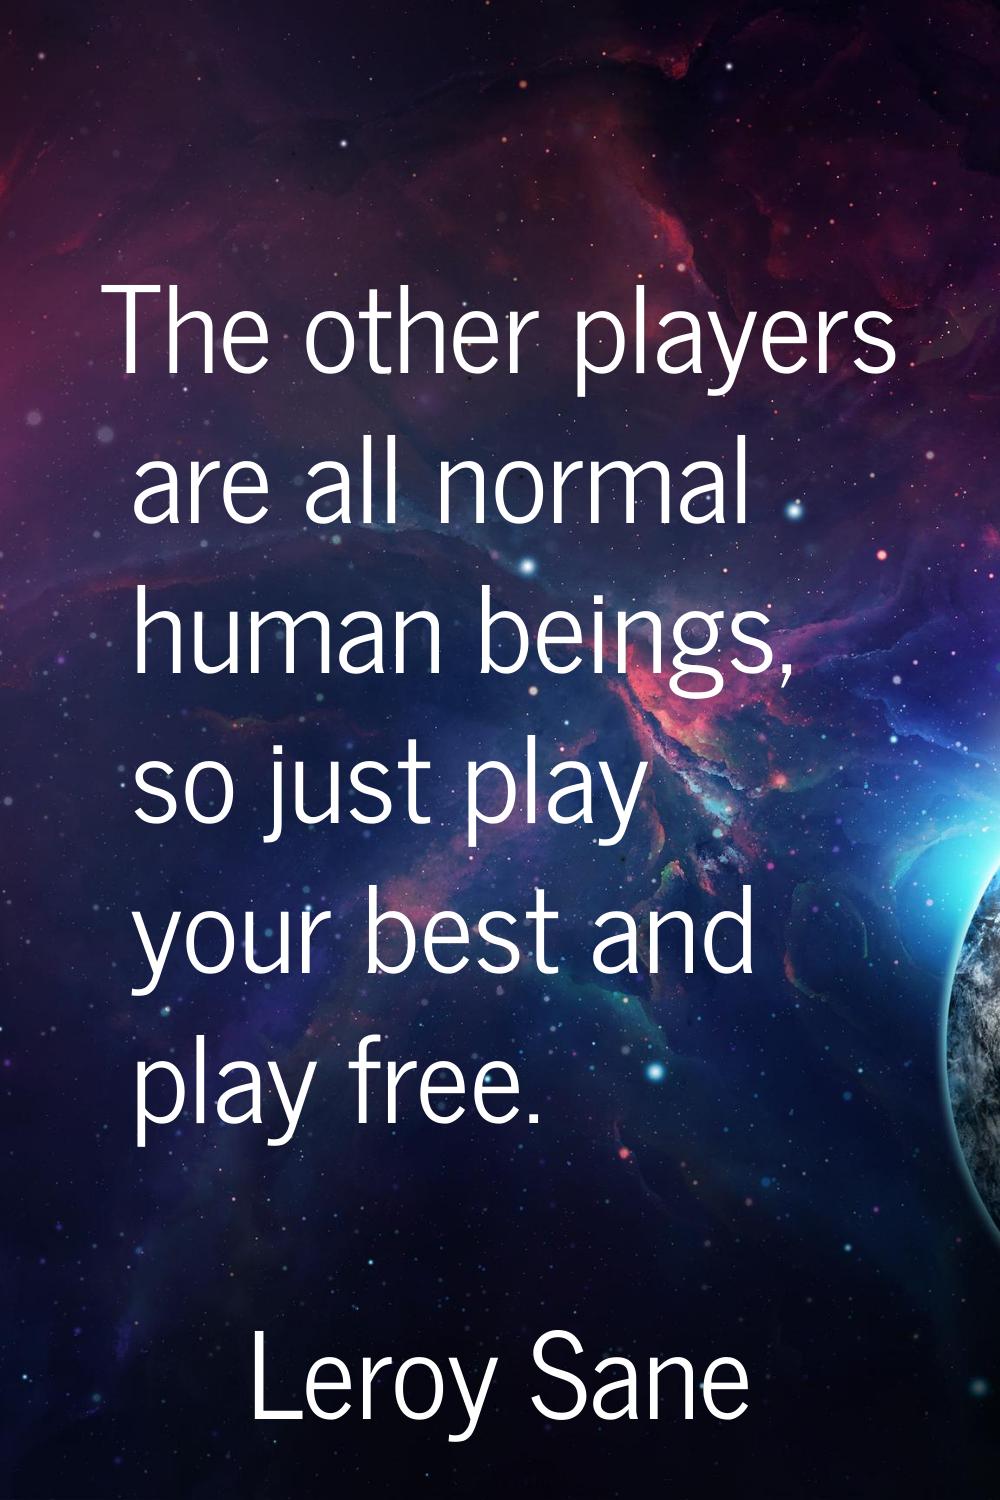 The other players are all normal human beings, so just play your best and play free.